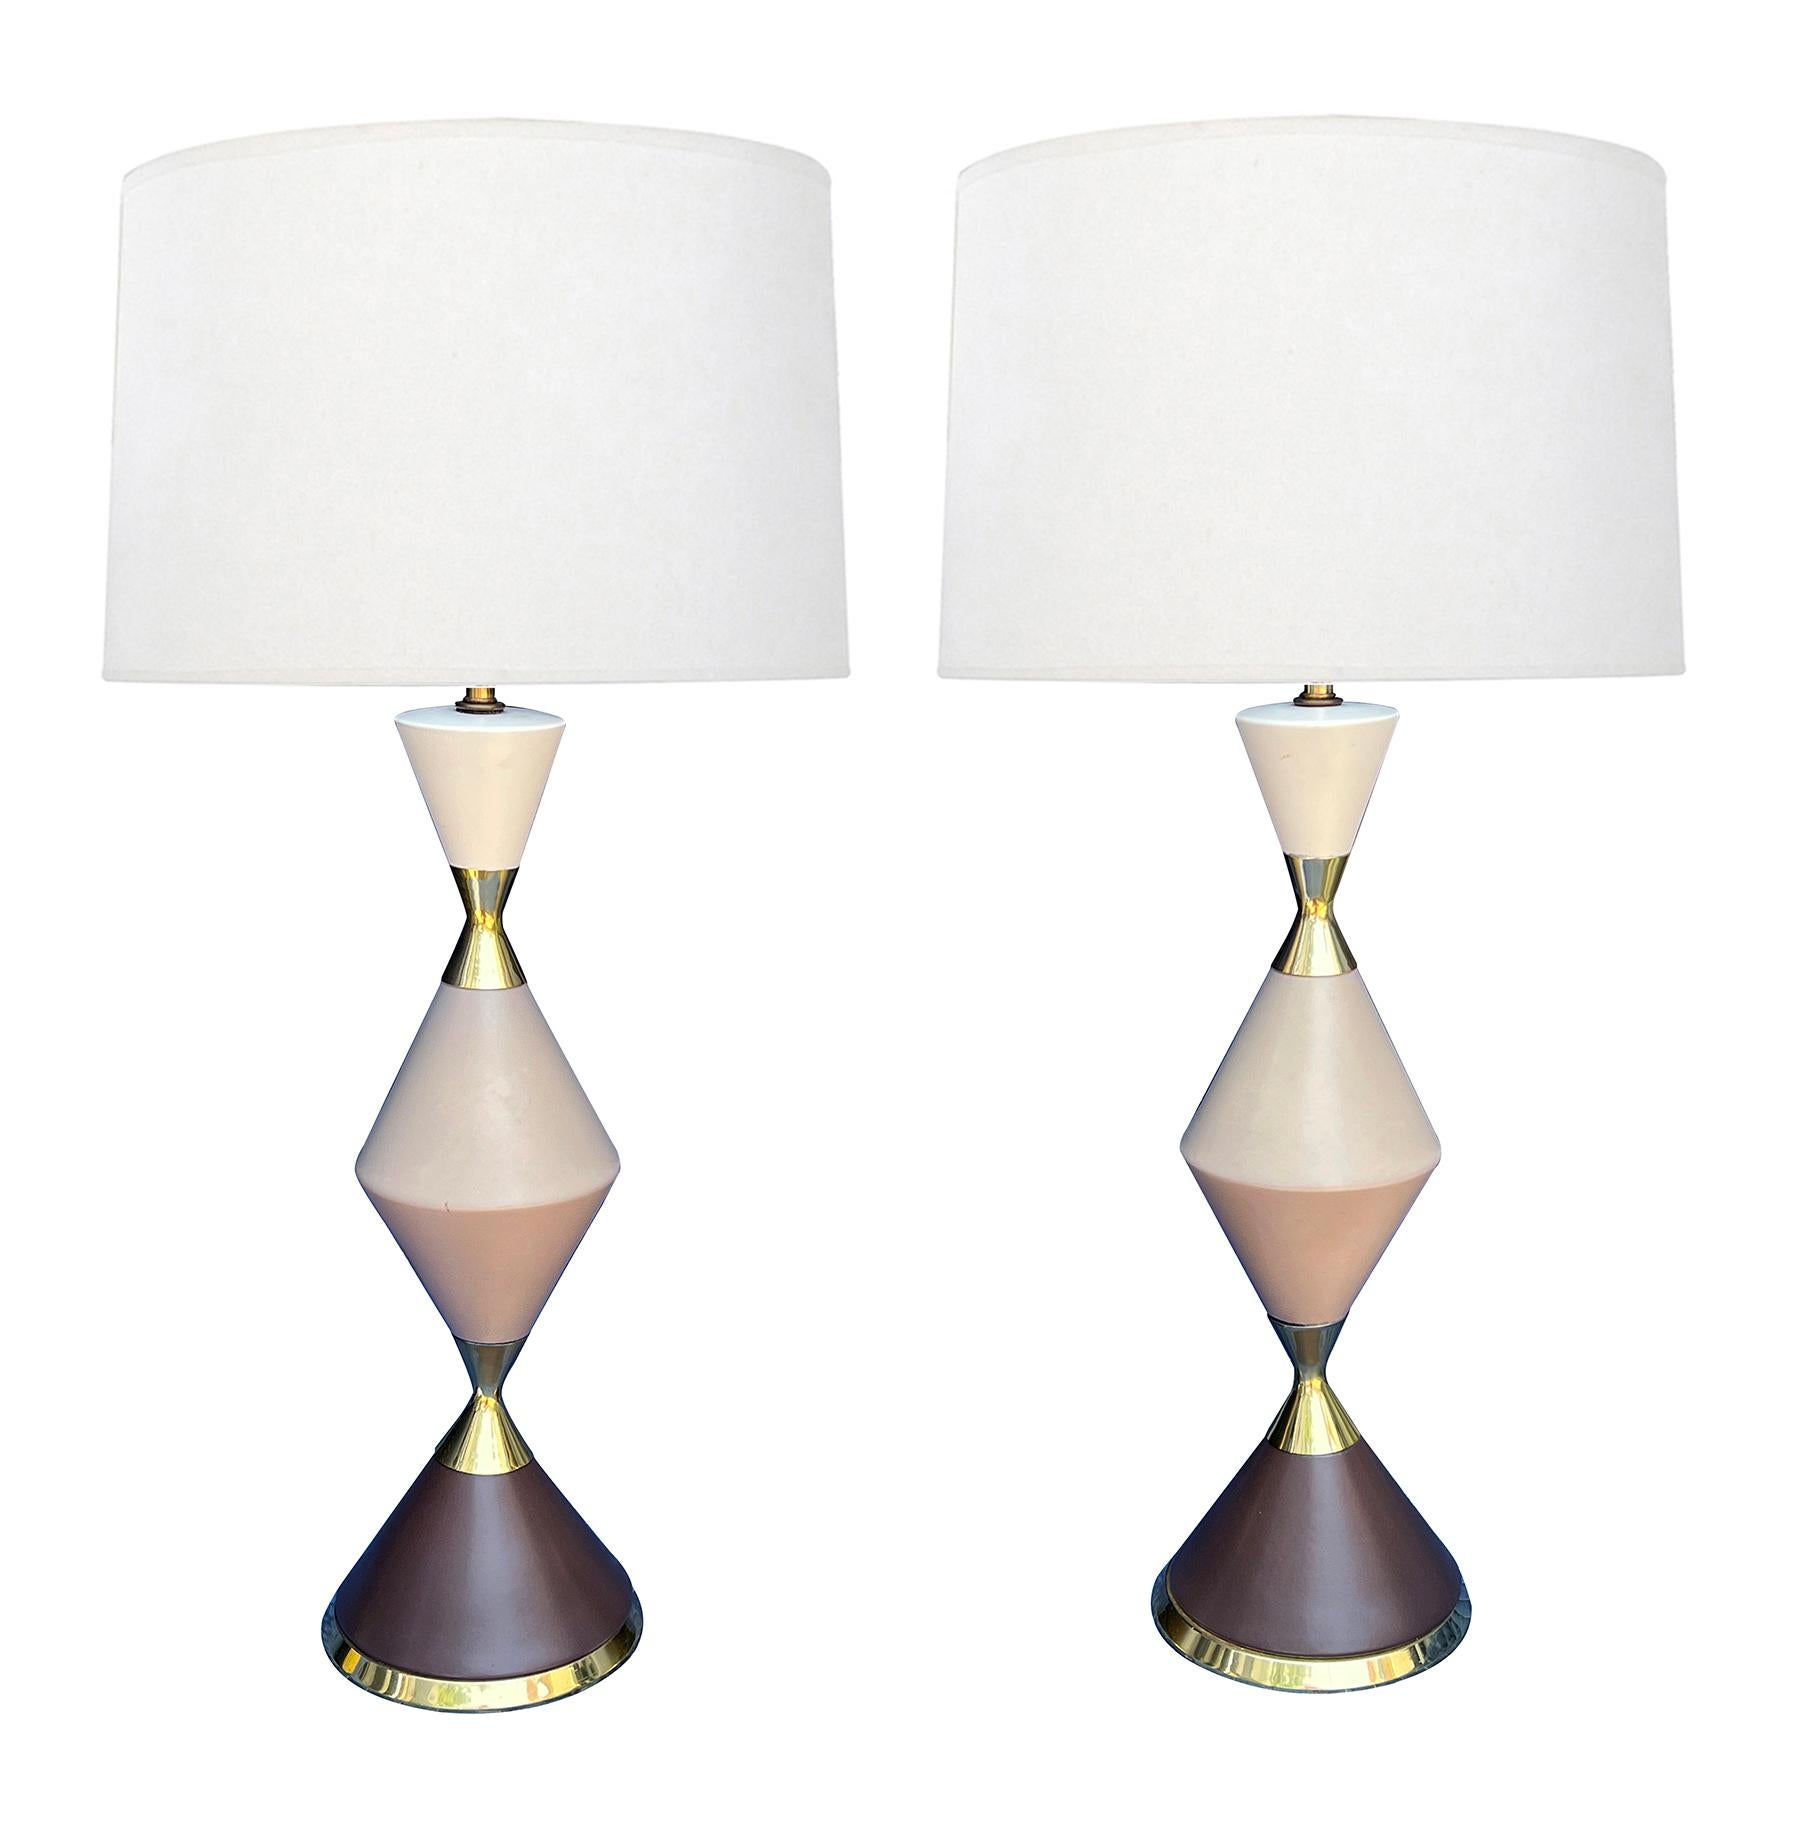 the best of post-war design, each lamp composed of stacked tri-color conical-form glazed elements with brass mounts; Gerald Thurston was one of the most creative American lighting designers of the postwar era. His innovative designs exemplify the